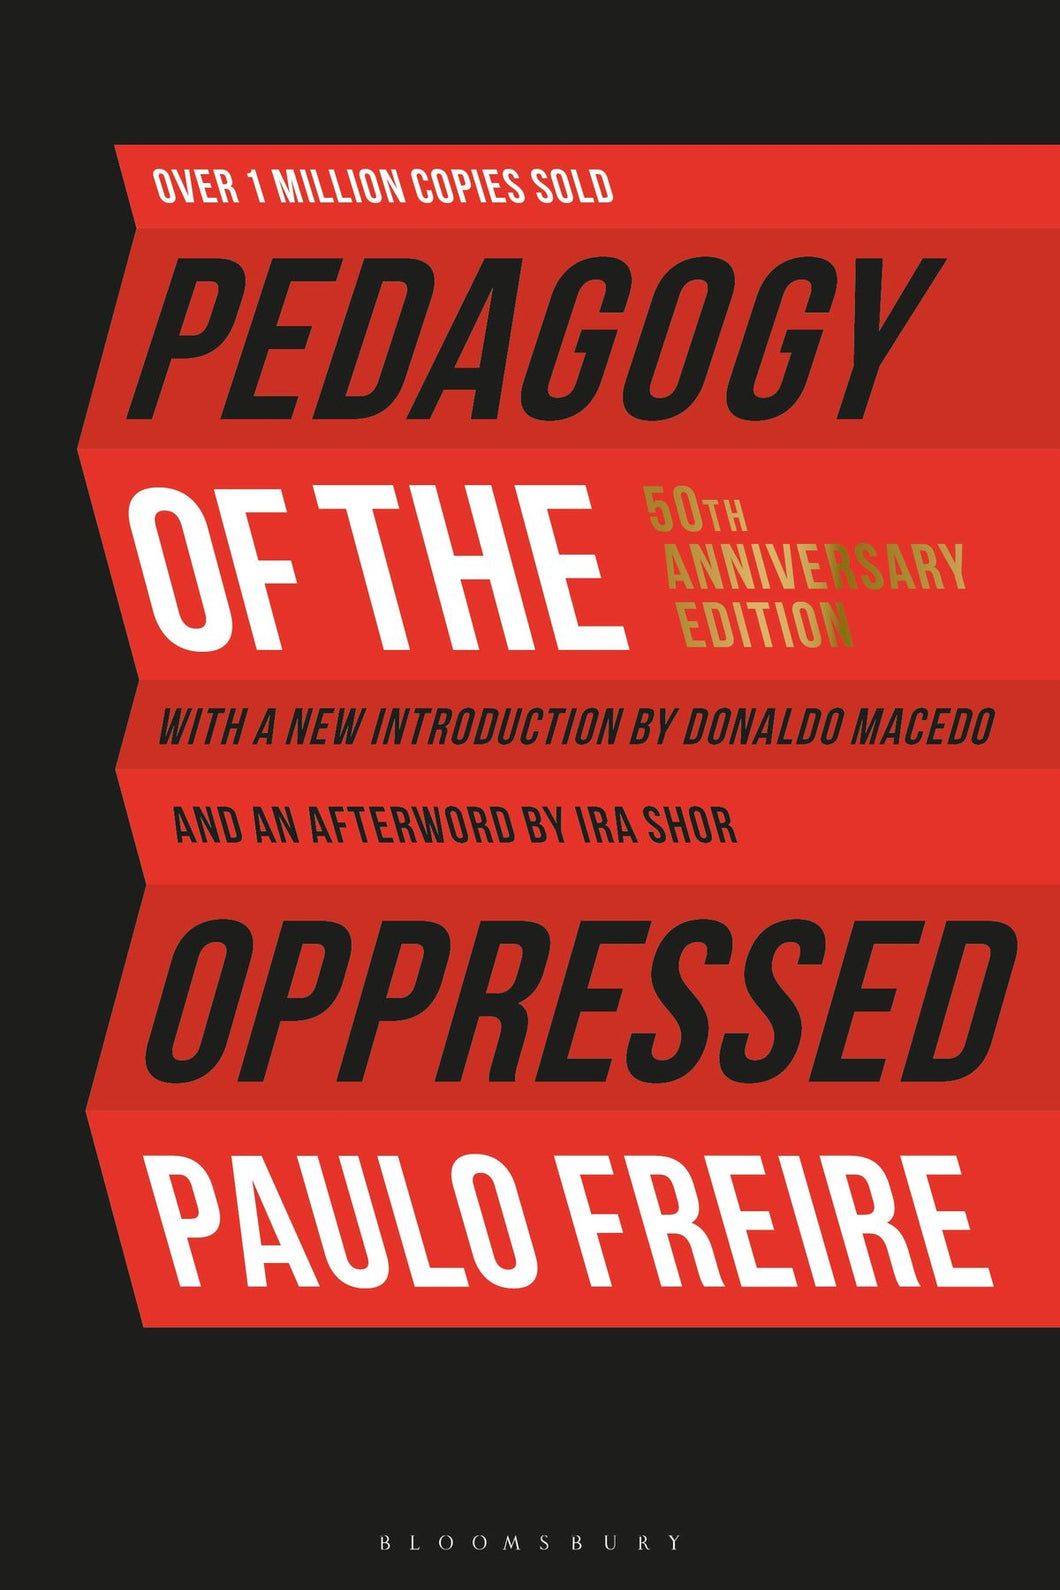 Pedagogy of the Oppressed by Paolo Freire